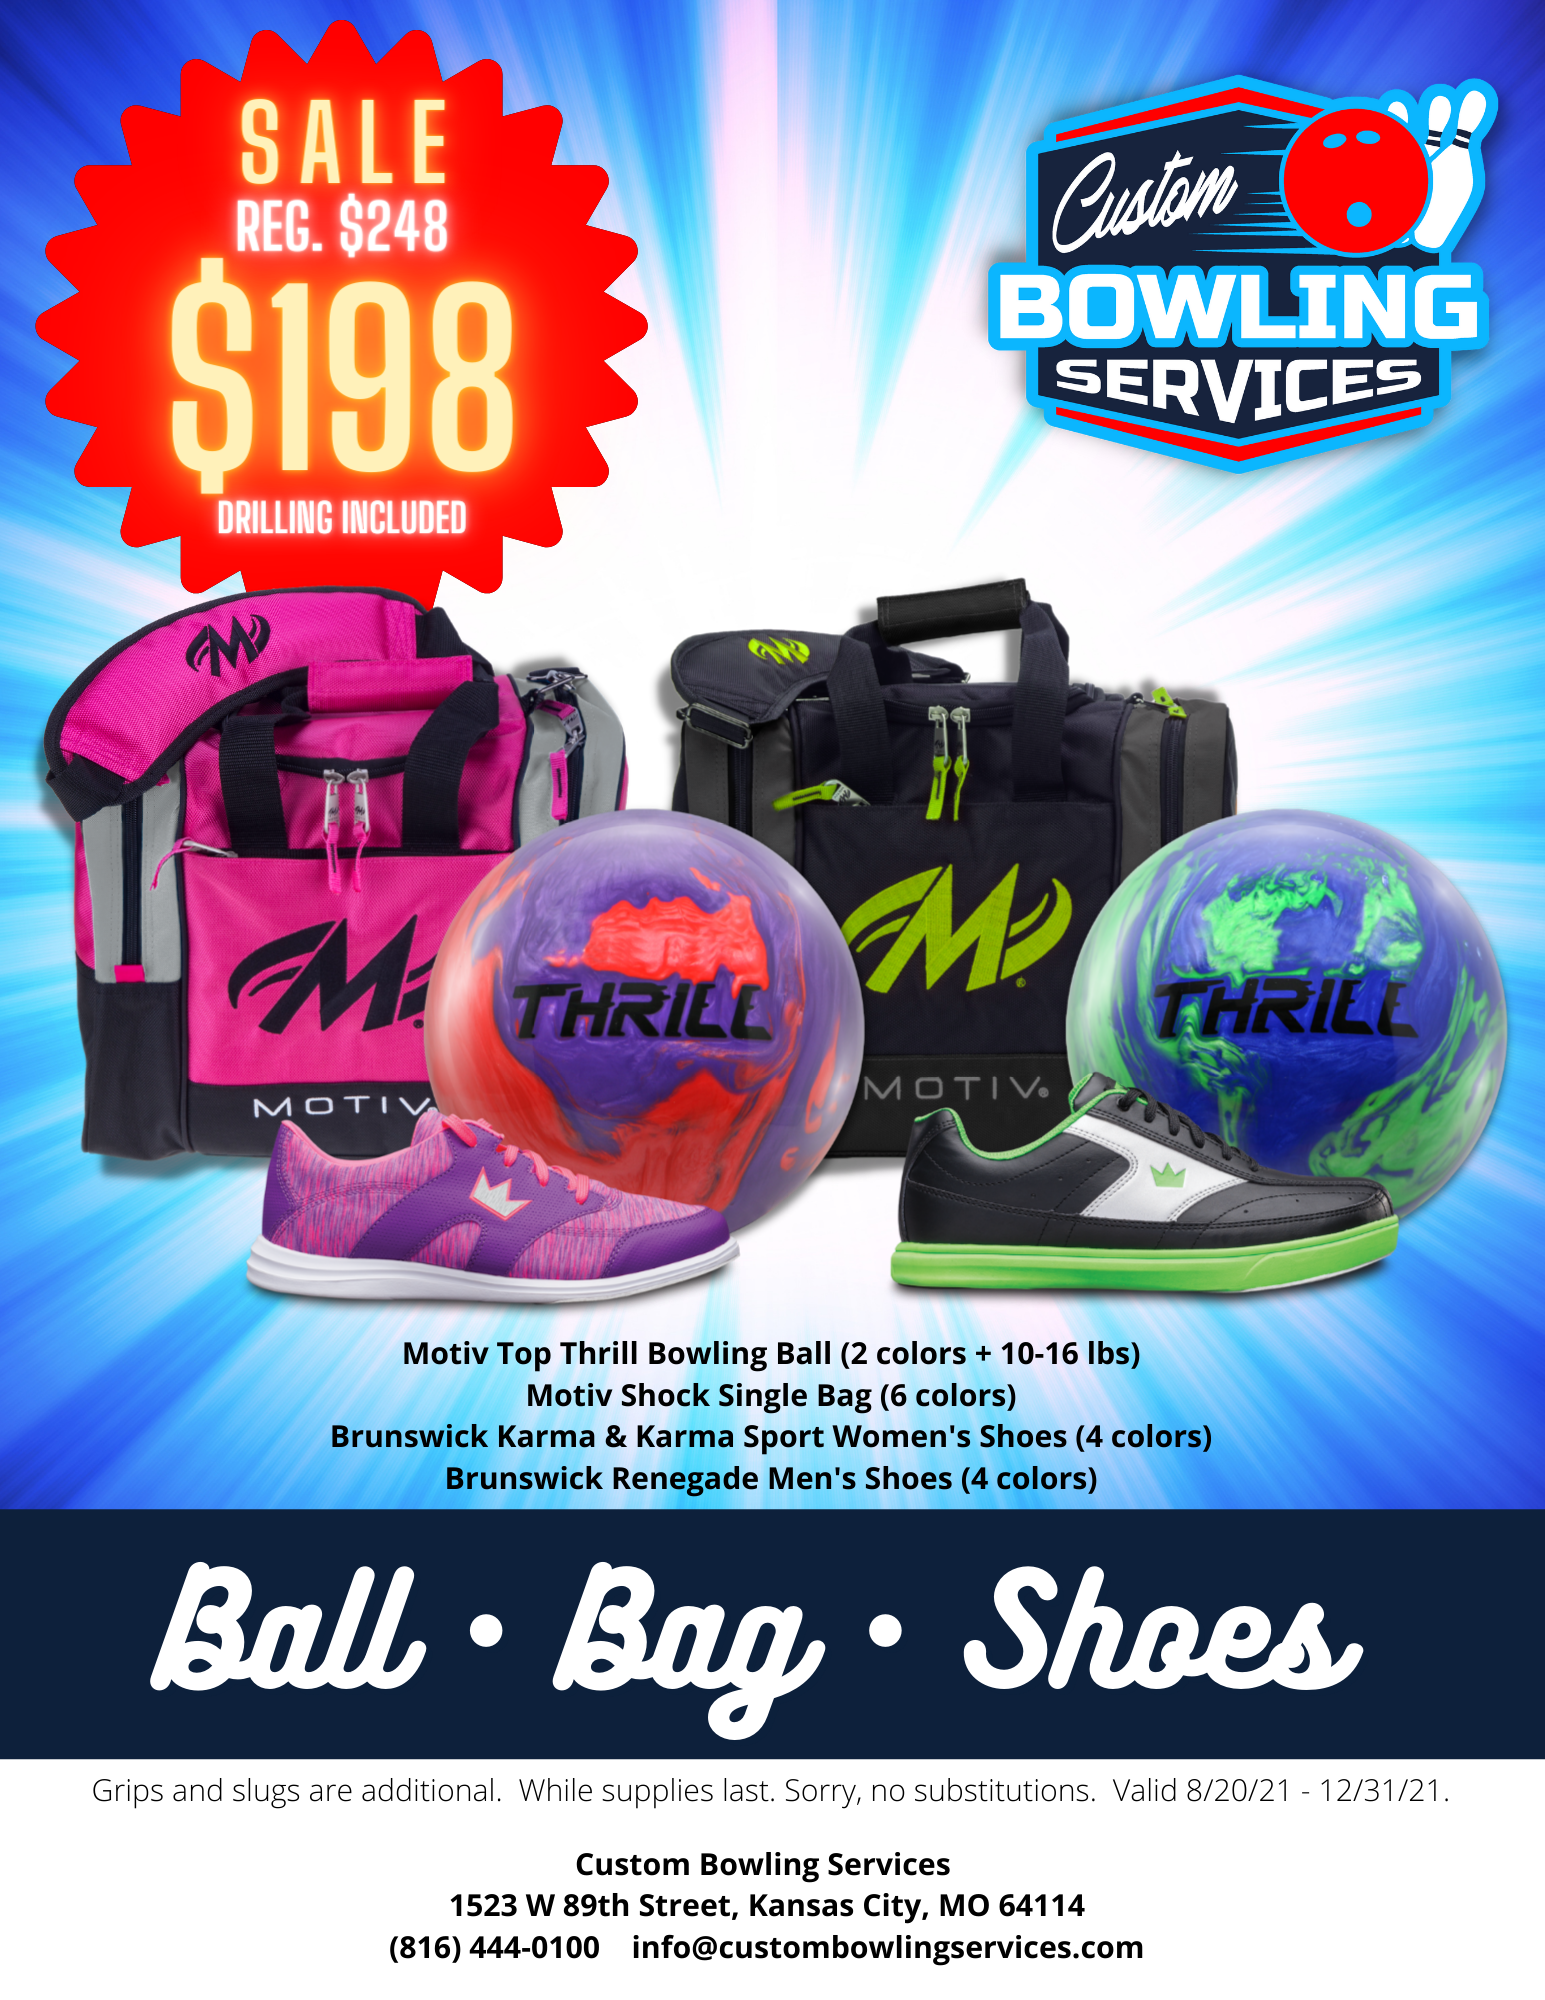 custom bowling services - ball bag and shoe package